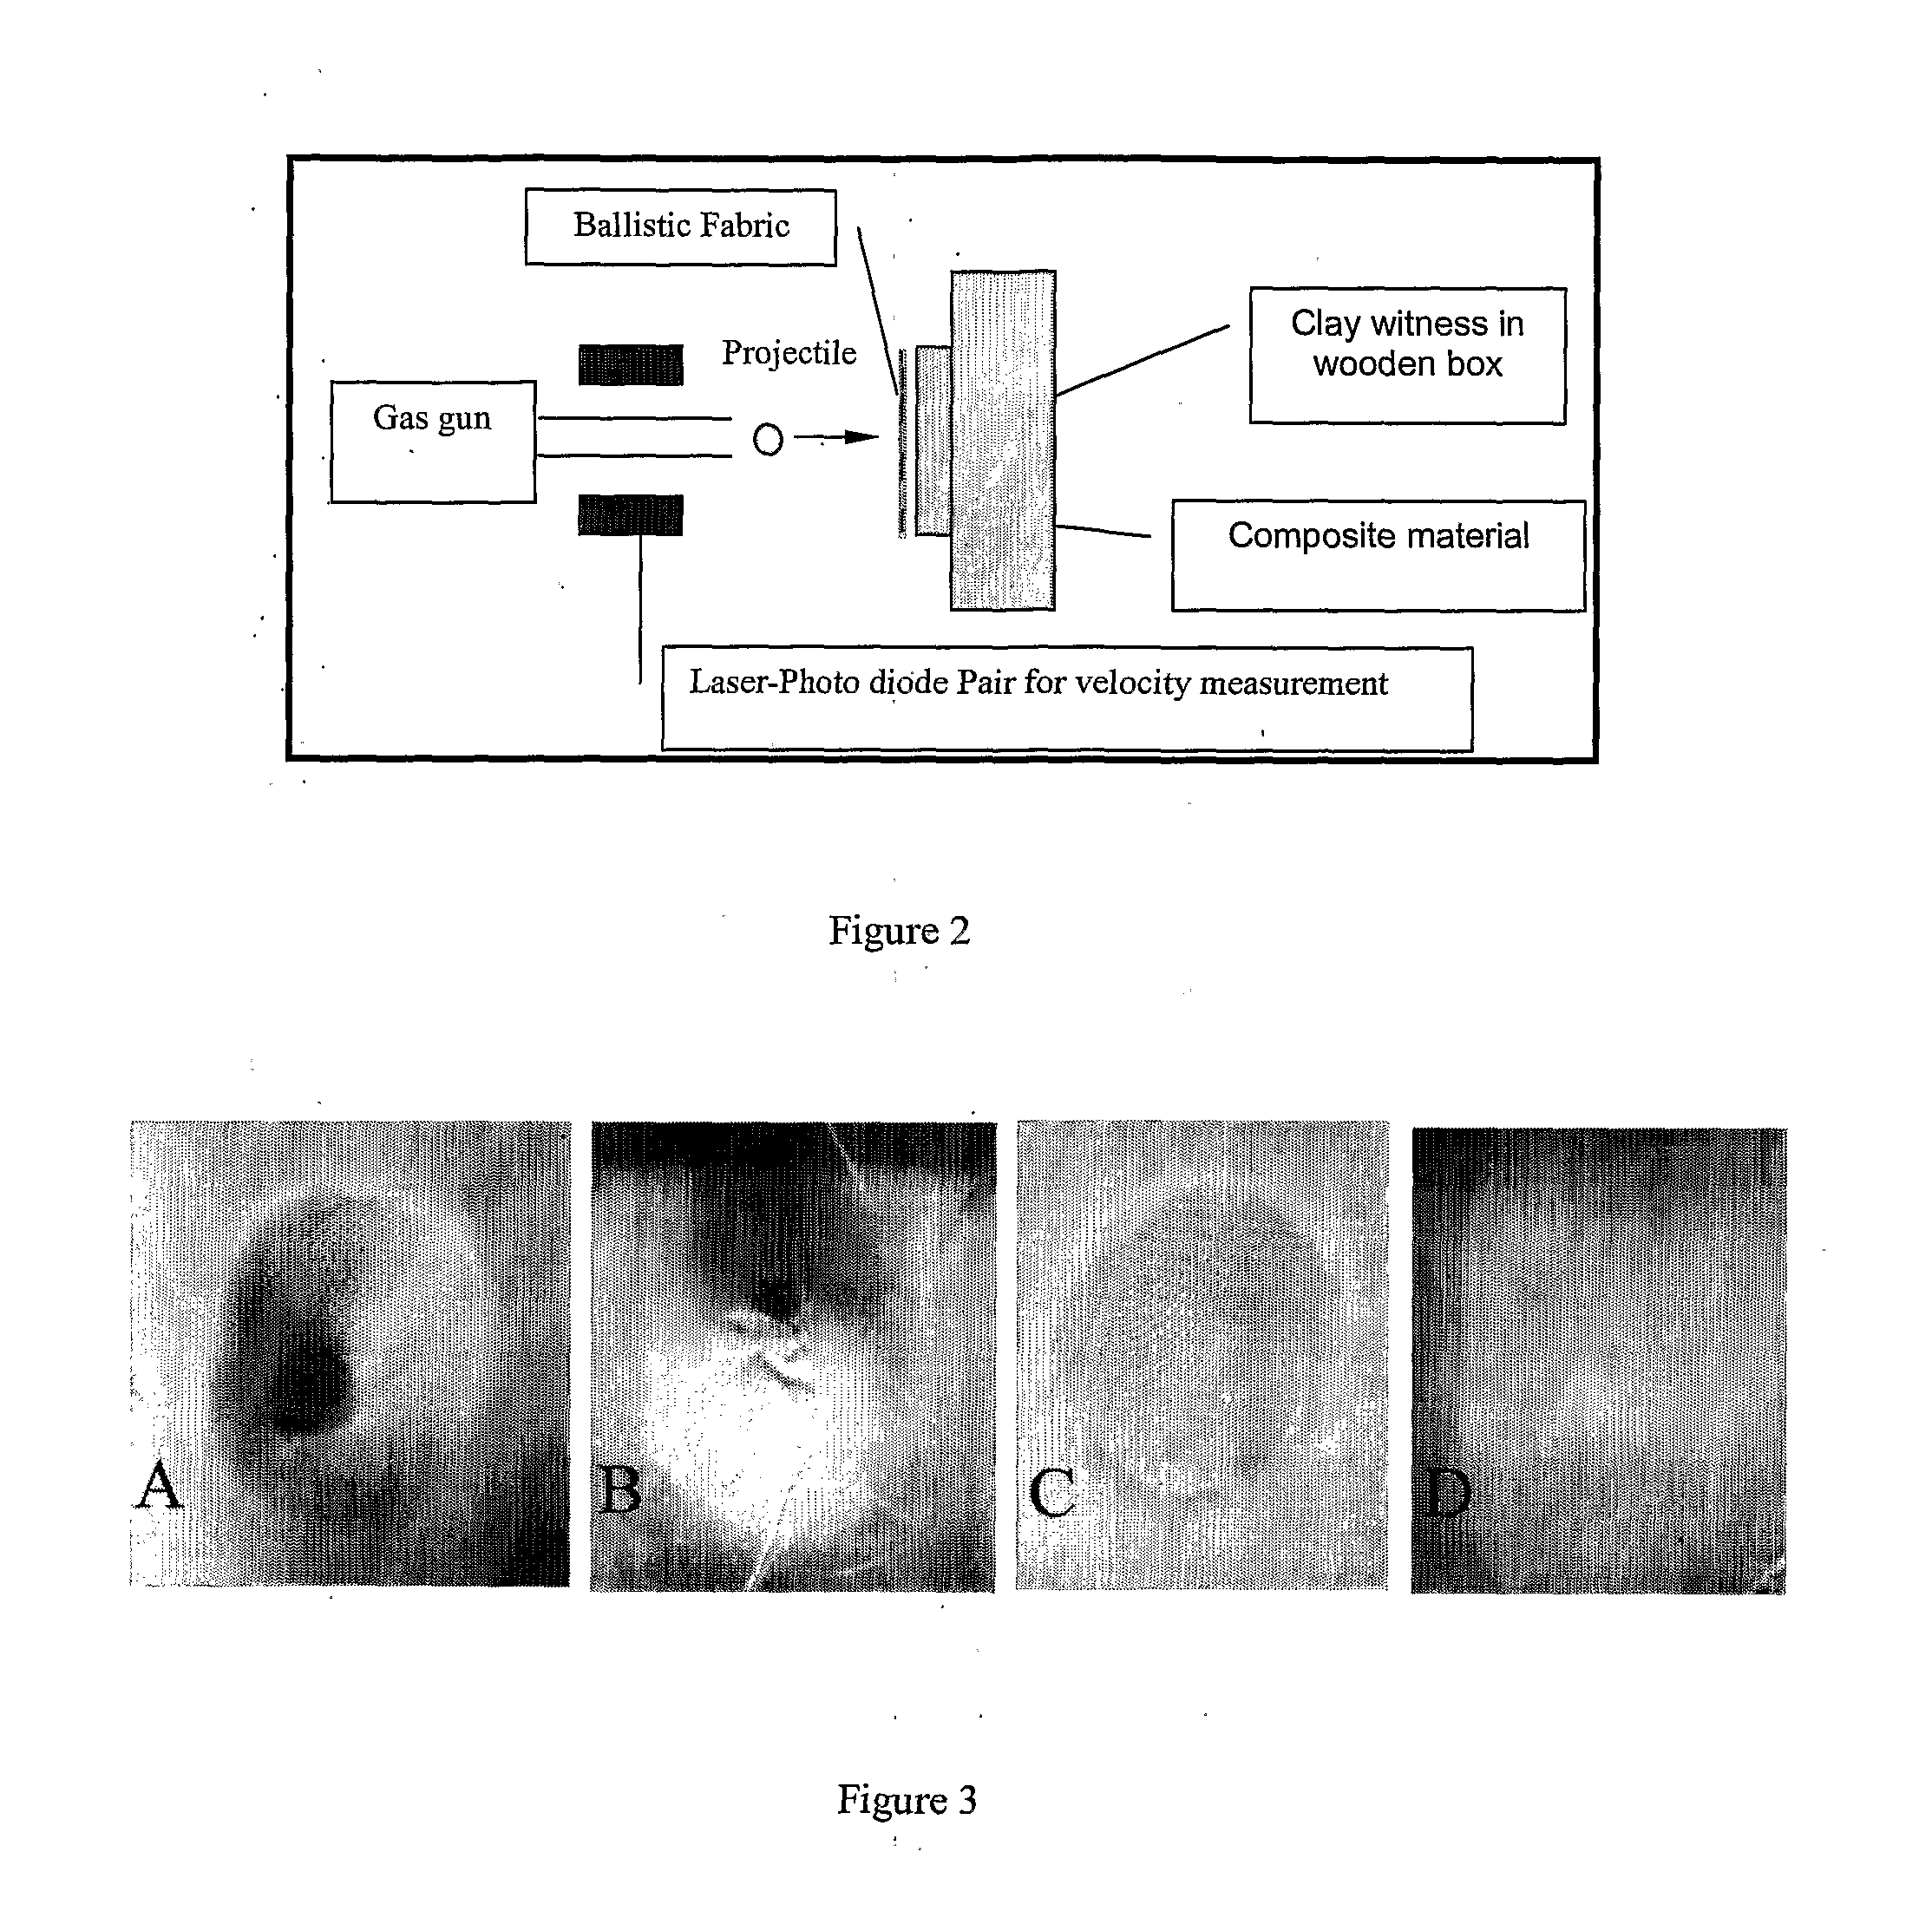 Energy dissipation composite material